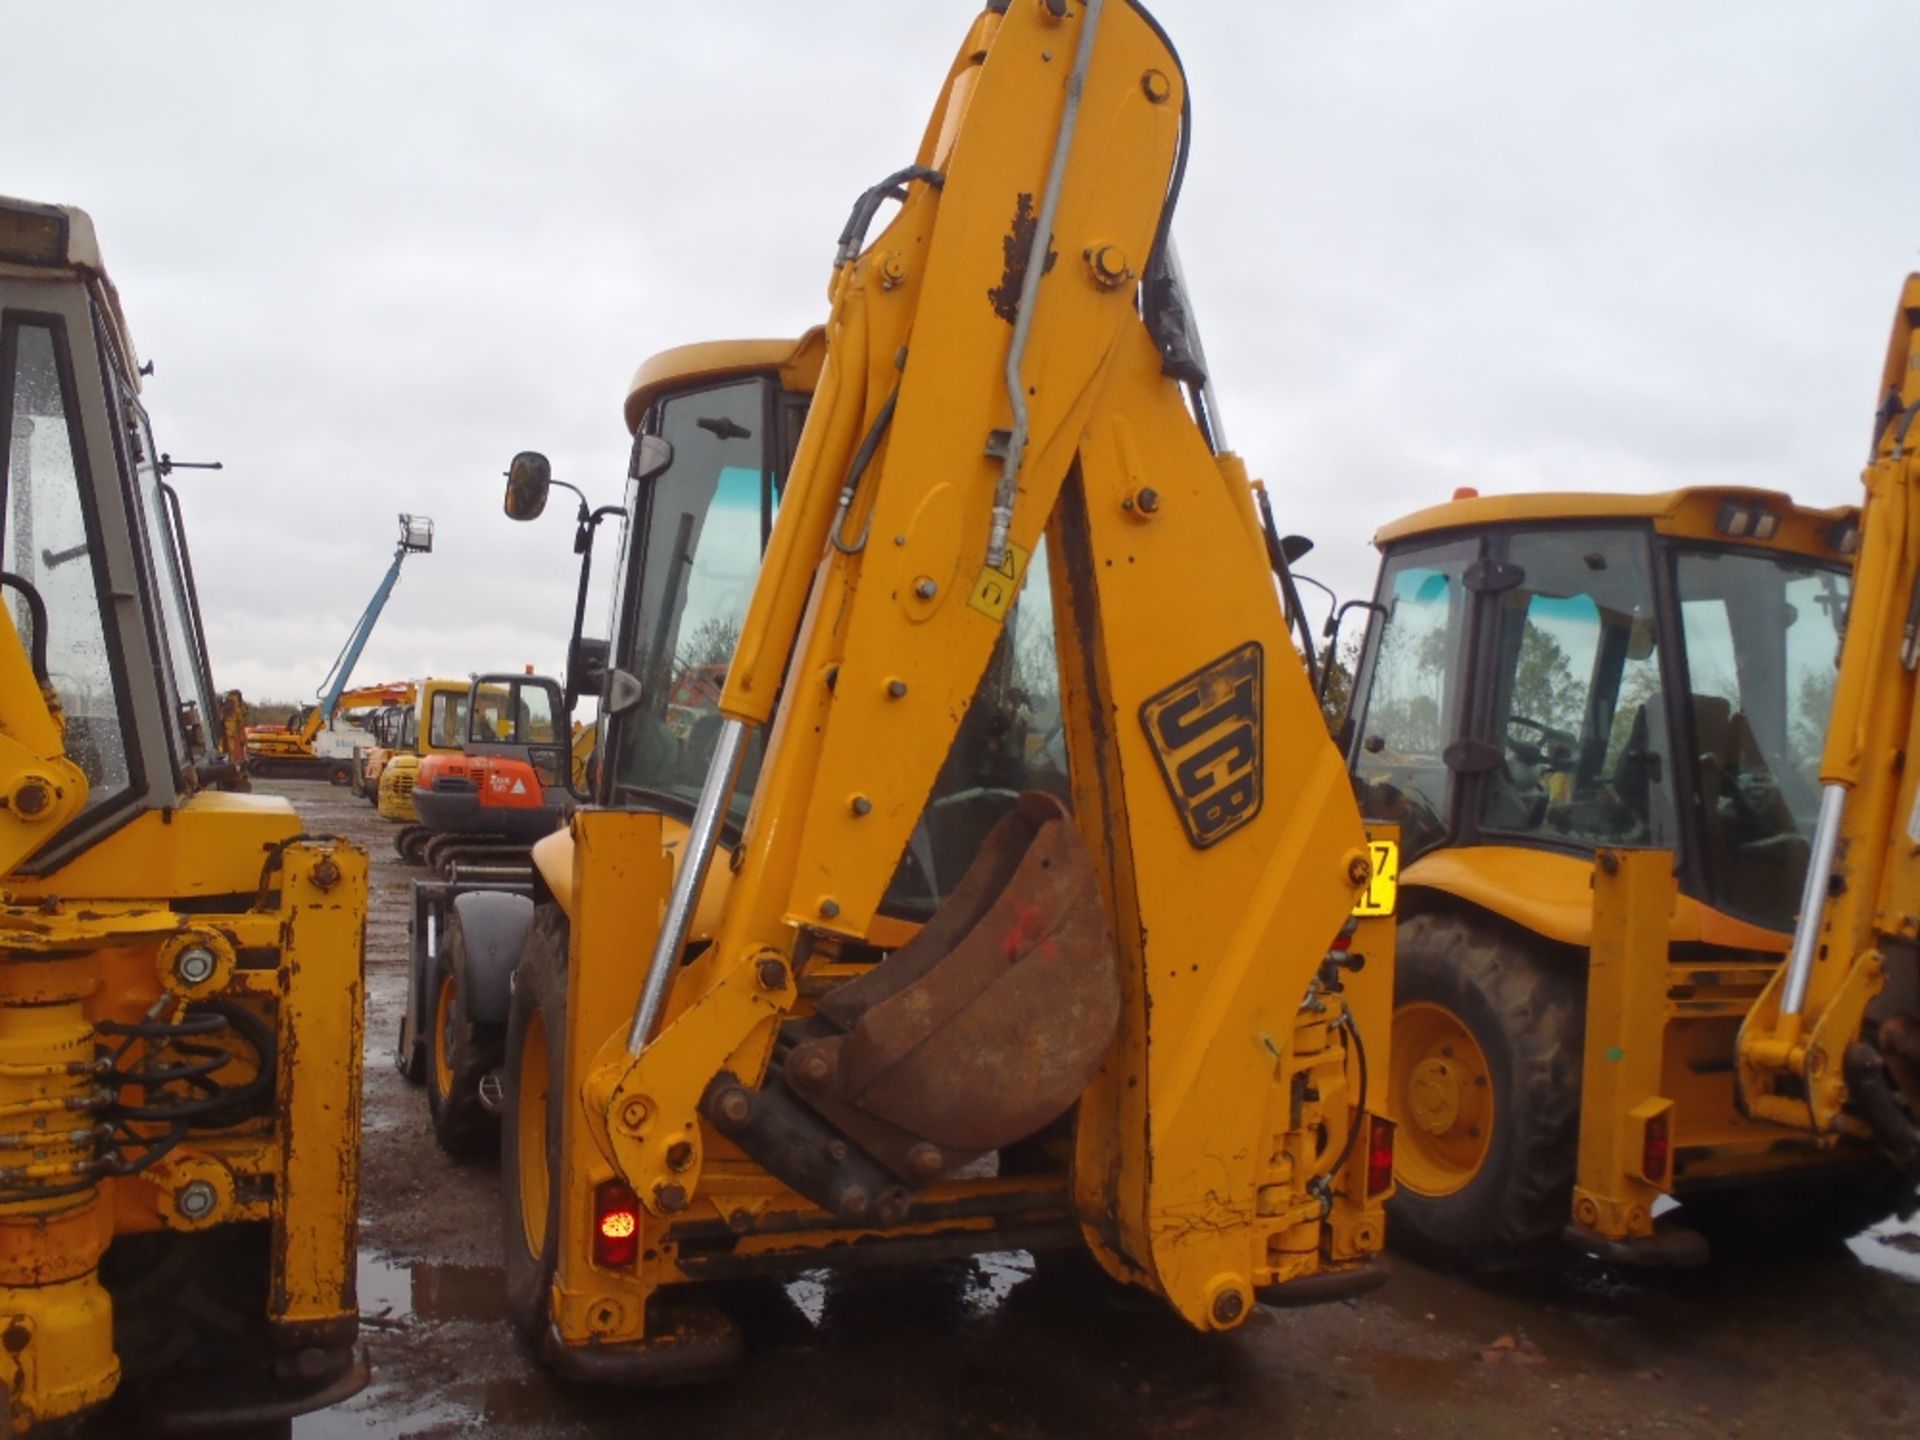 2008 JCB 3CX Sitemaster 4x4 with 4 in 1 Bucket, Extending Dipper Arm & Quick Hitch. V5 will be - Image 5 of 5